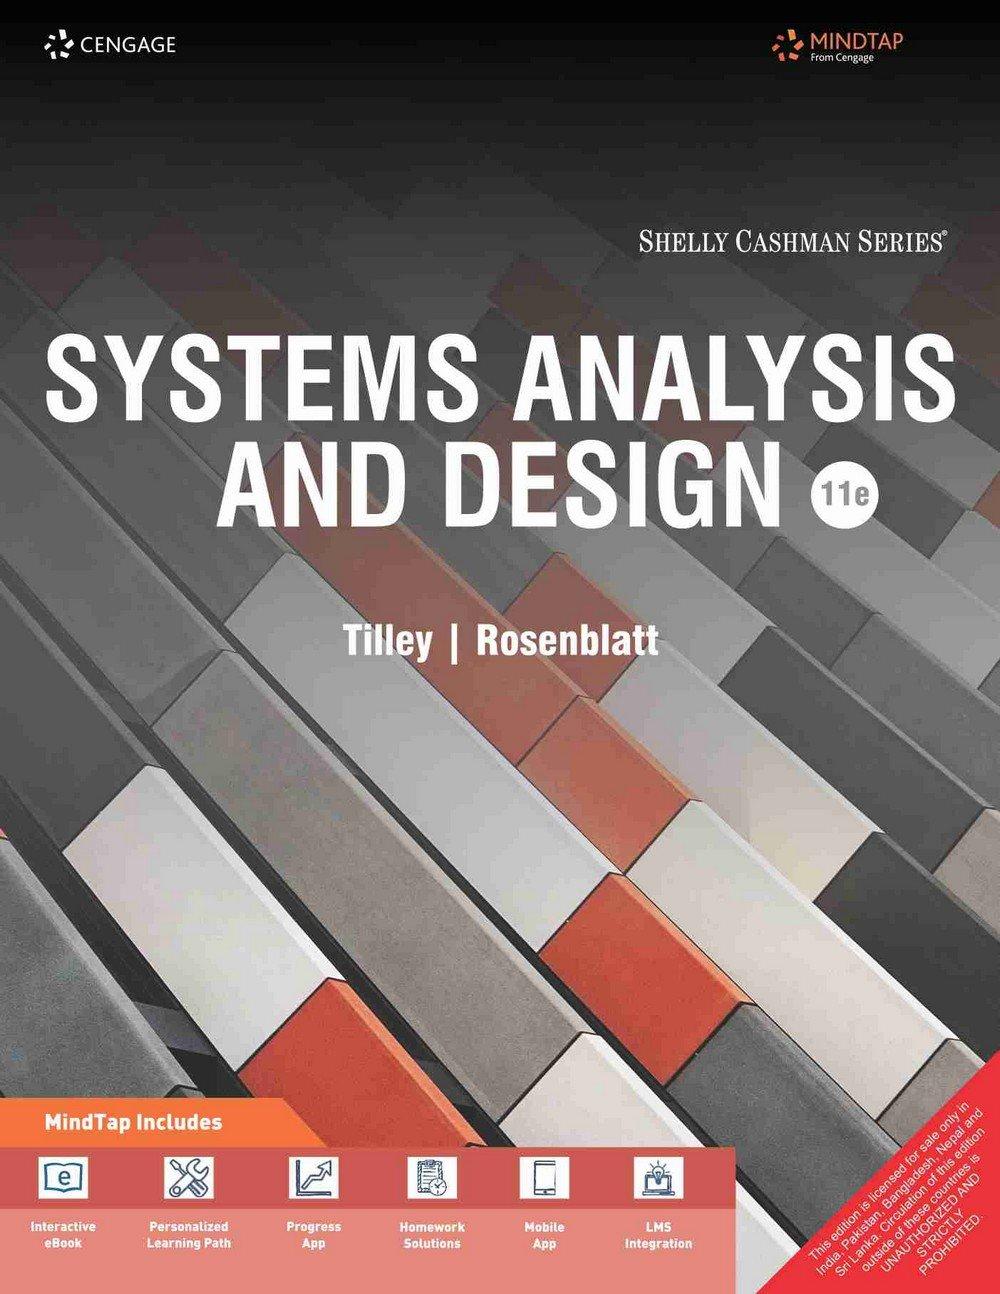 systems analysis and design with mindtap 11th edition harry j. rosenblatt and scott tilley 9386650398,